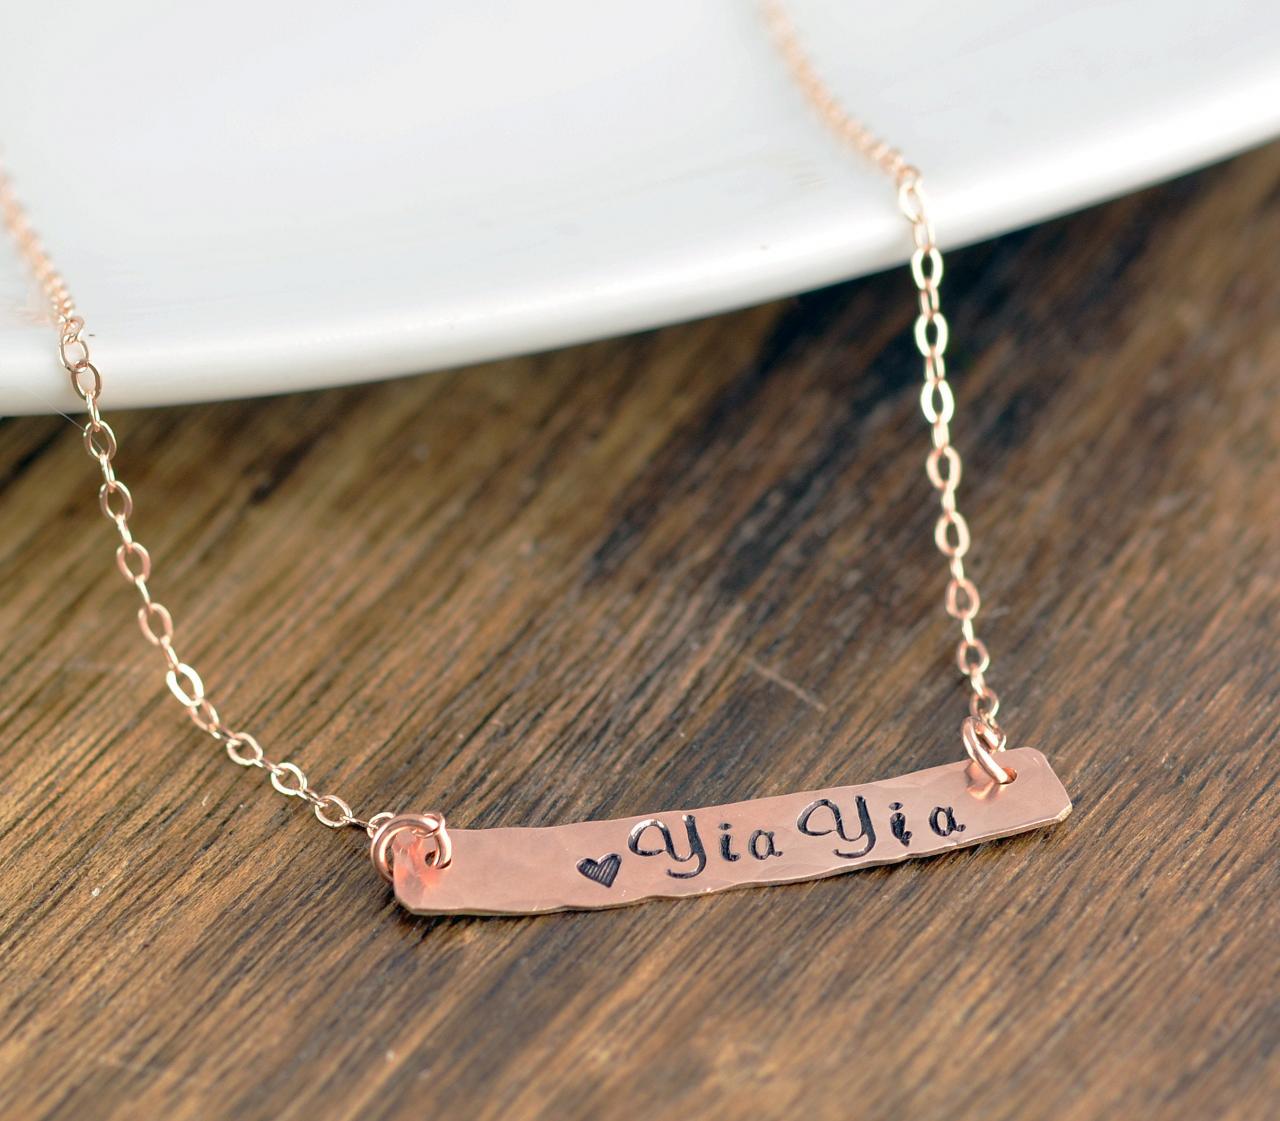 Rose Gold Bar Necklace, Personalized Bar Necklace, Name Necklace, Yia Yia Gift, Gifts For Yia Yia, Name Plate, Horizontal Bar Necklace